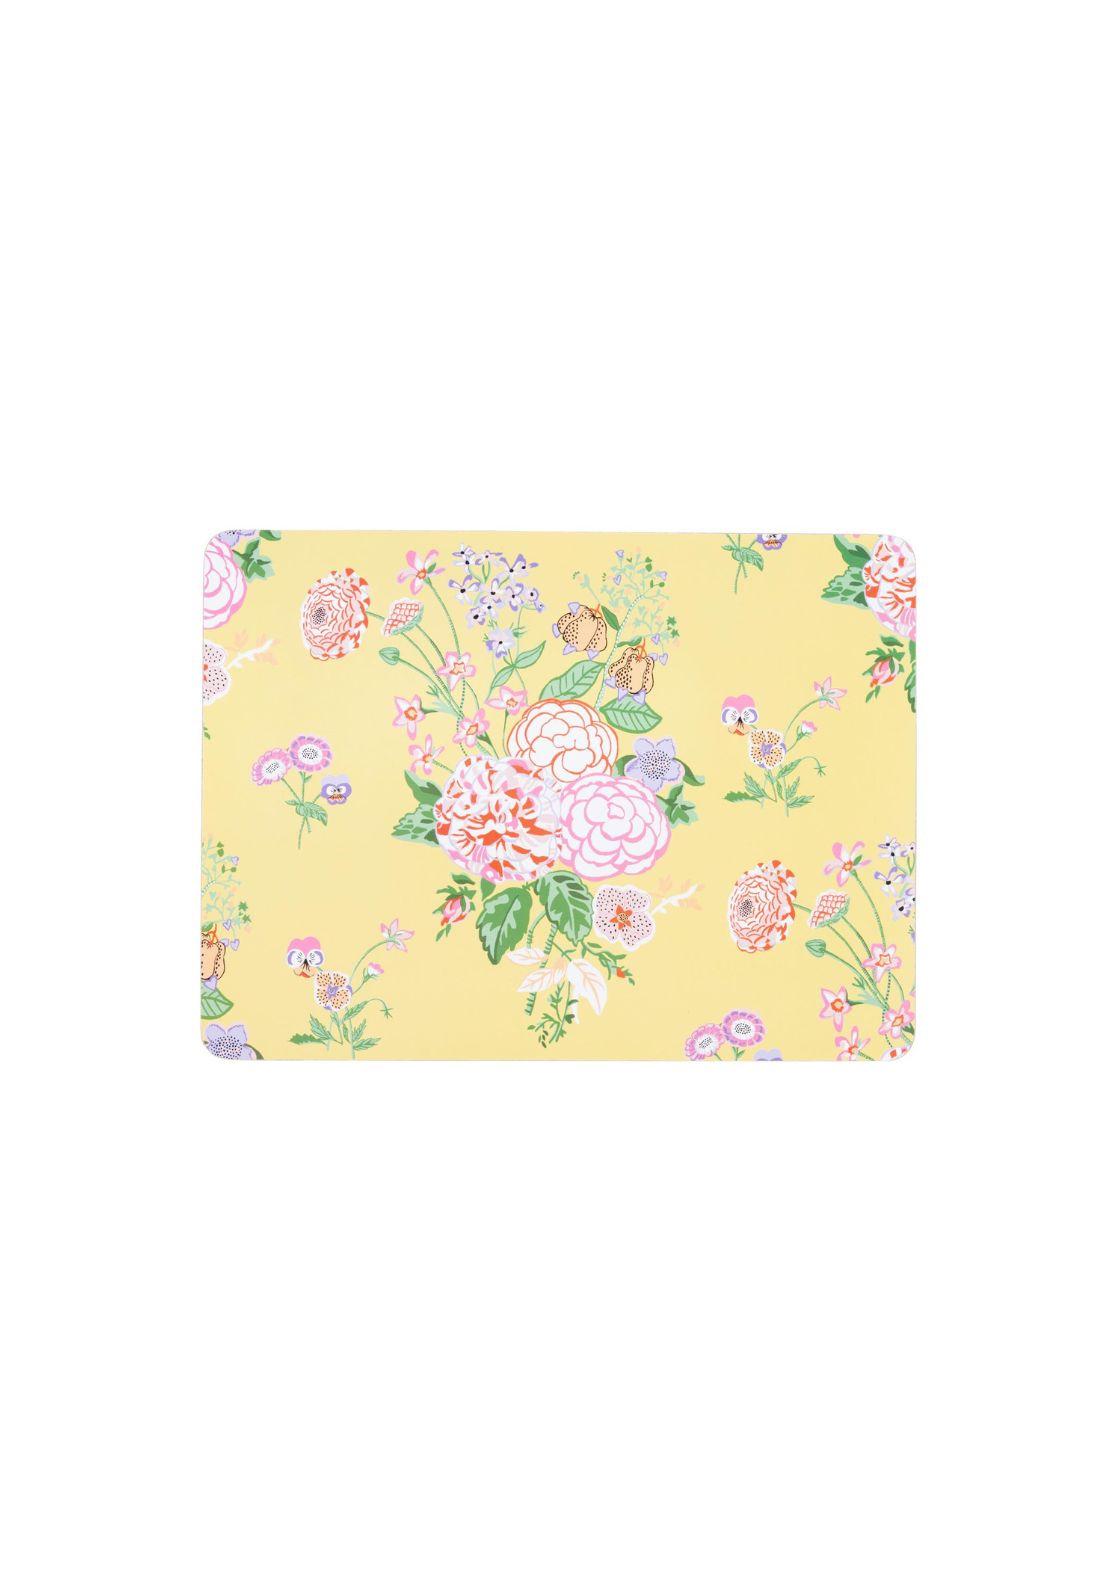 Cath Kidston Floral Fields 4 Pack Cork Back Table Mat 1 Shaws Department Stores